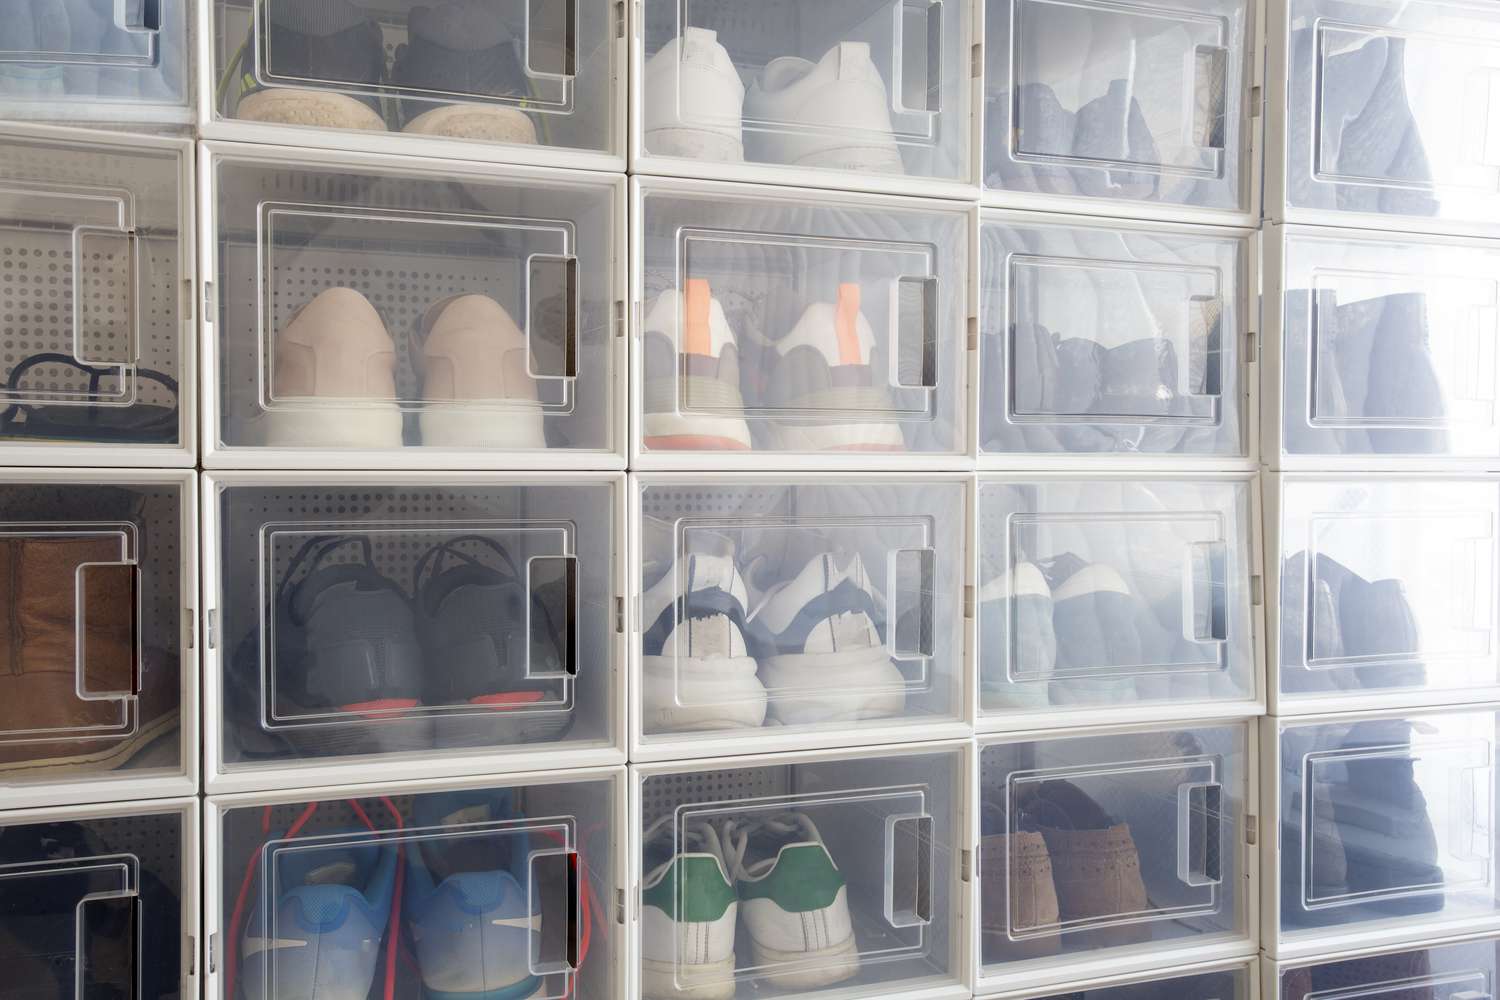 Shoes stored in plastic shoe boxes with clear fronts